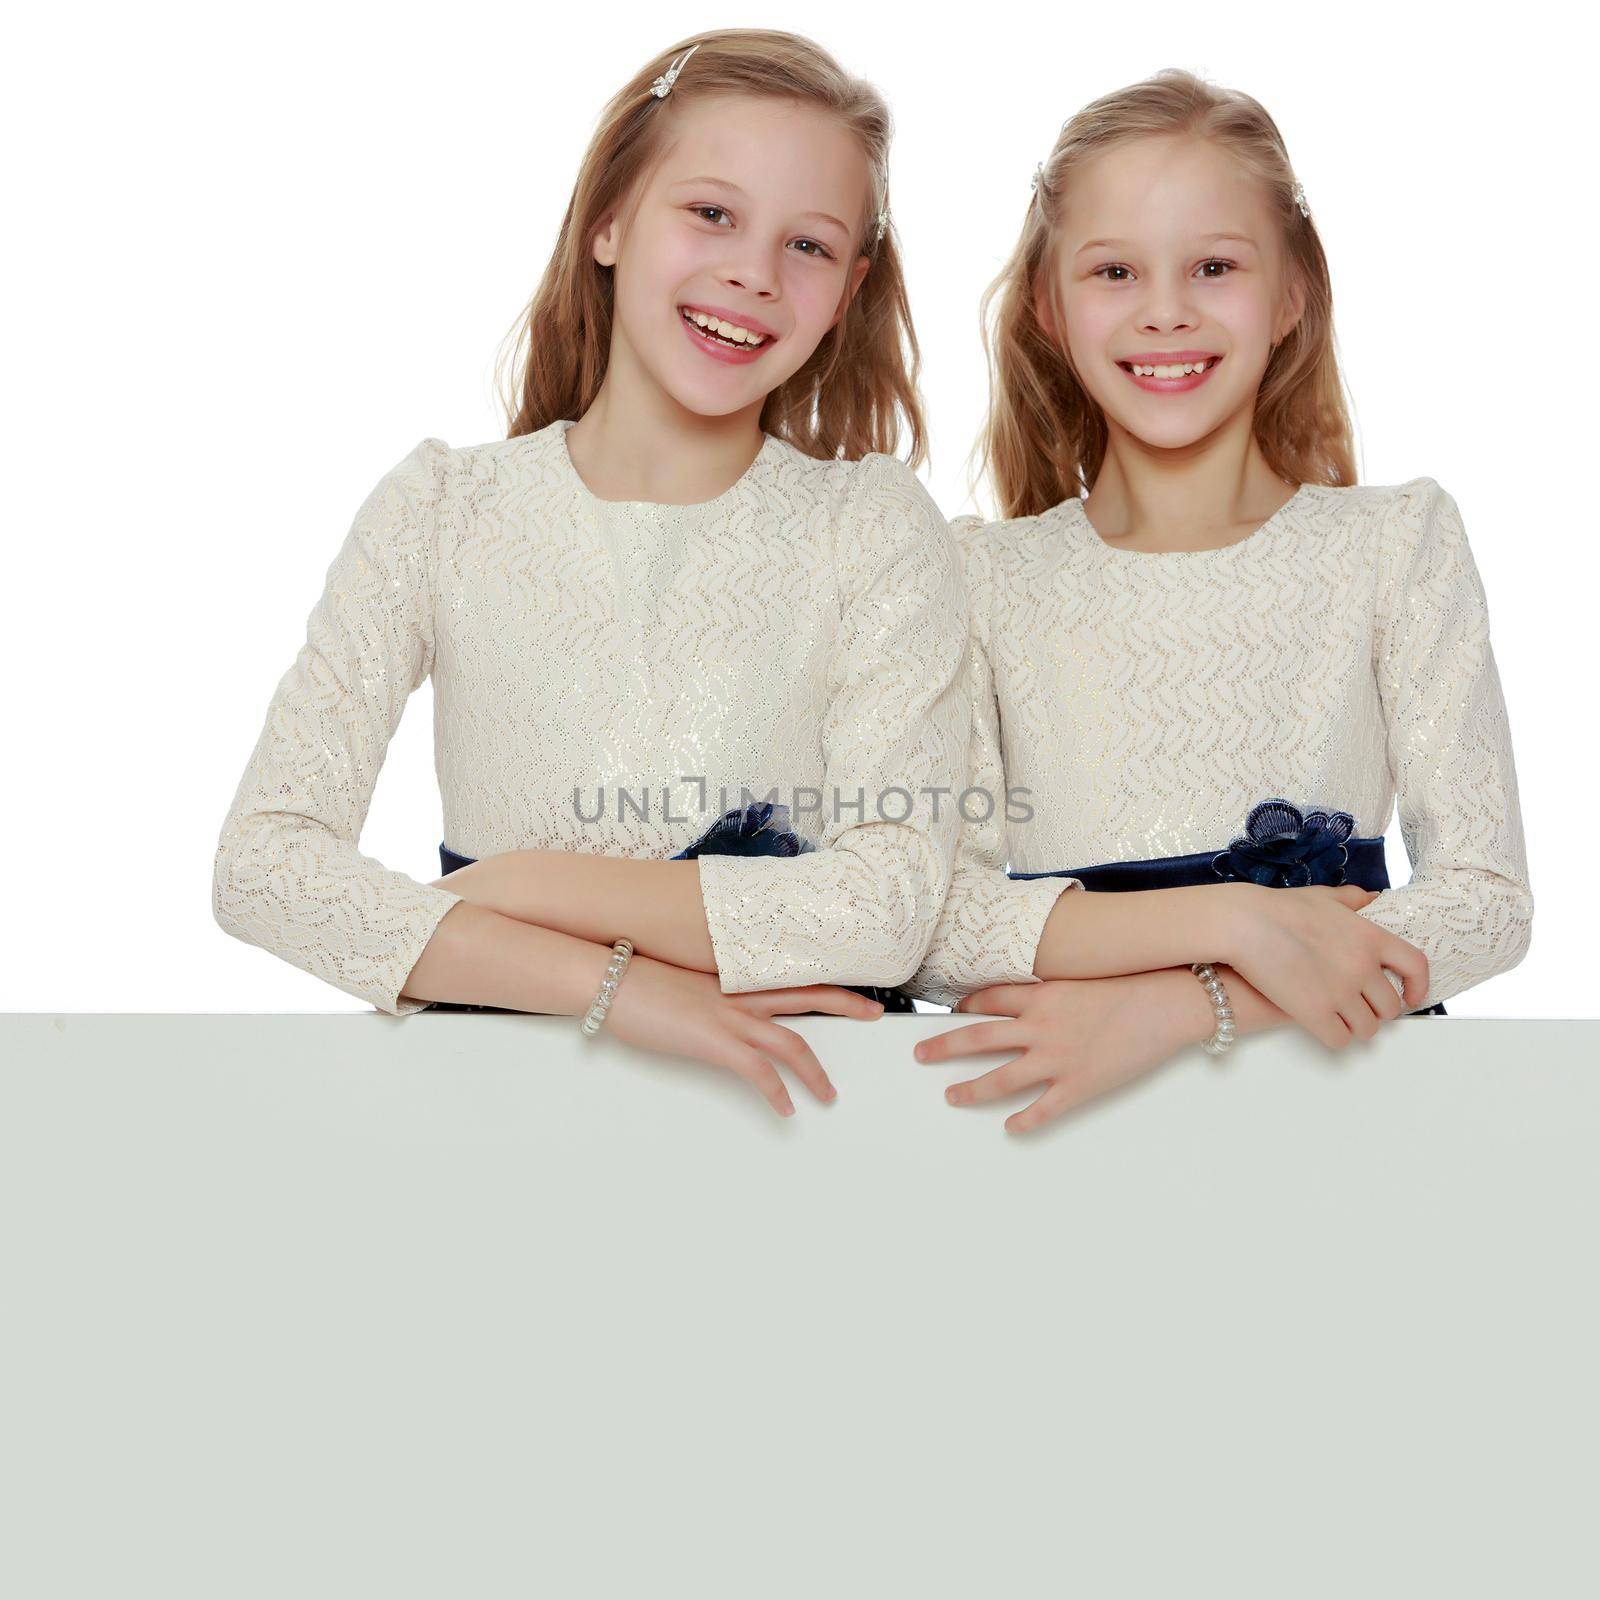 Two little girls peeking out from behind a white advertising ban by kolesnikov_studio